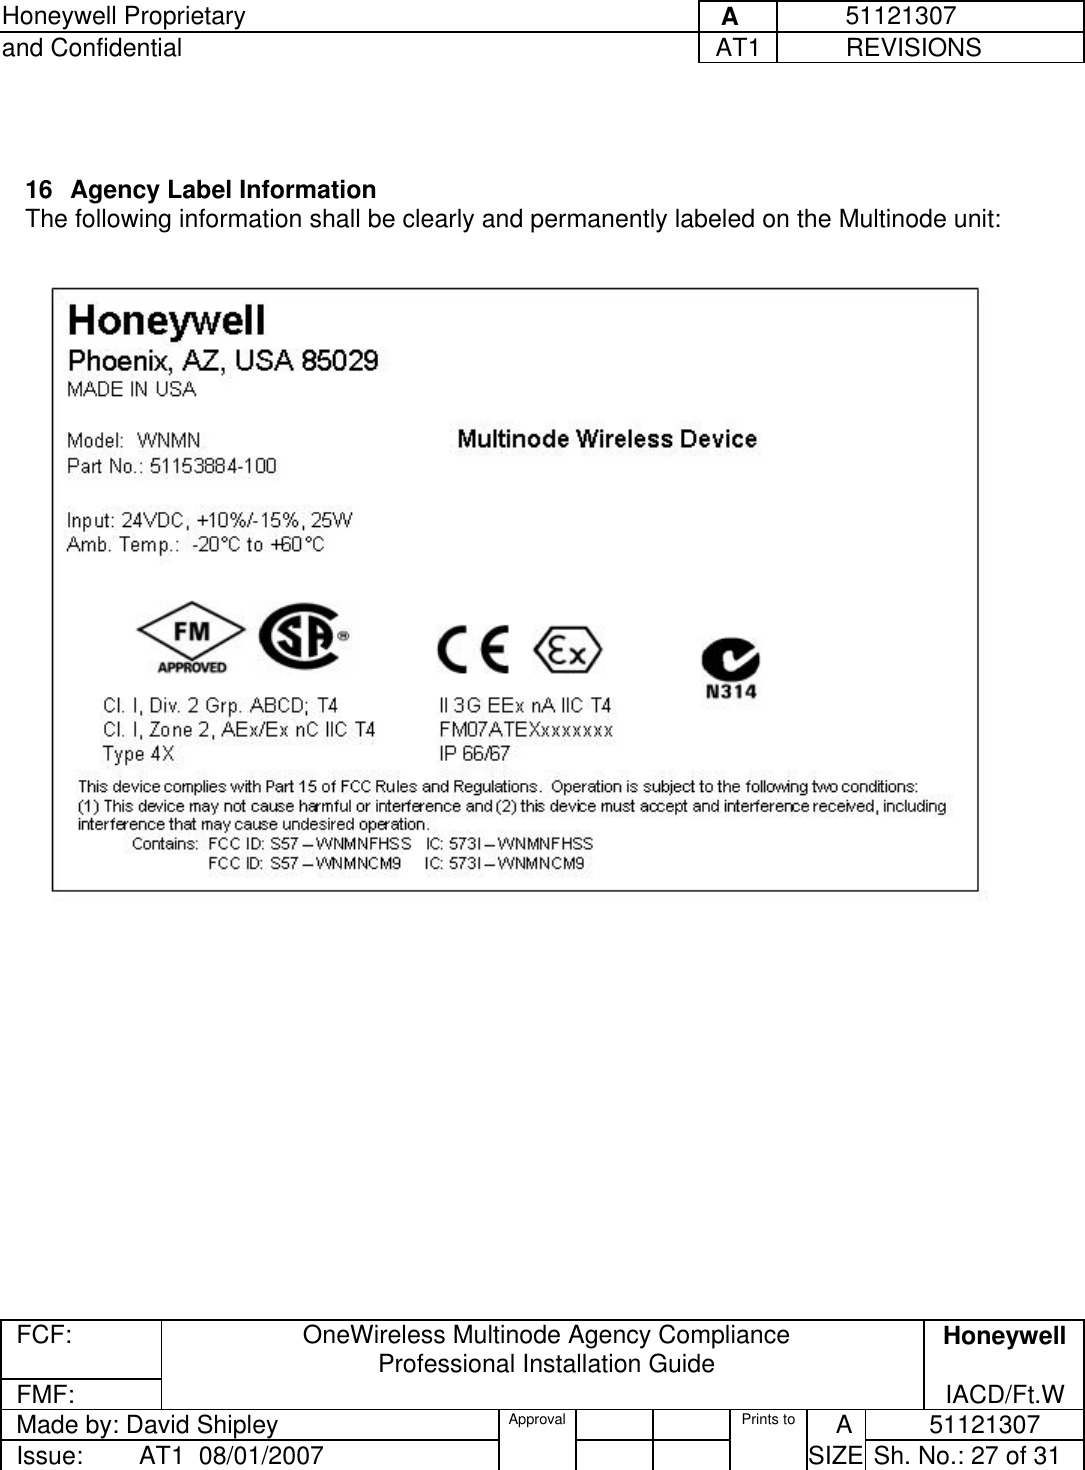 Honeywell Proprietary     A          51121307 and Confidential  AT1           REVISIONS  FCF:  OneWireless Multinode Agency Compliance Professional Installation Guide  Honeywell FMF:               IACD/Ft.W Made by: David Shipley  Approval   Prints to     A           51121307 Issue:        AT1  08/01/2007          SIZE  Sh. No.: 27 of 31    16  Agency Label Information The following information shall be clearly and permanently labeled on the Multinode unit:         